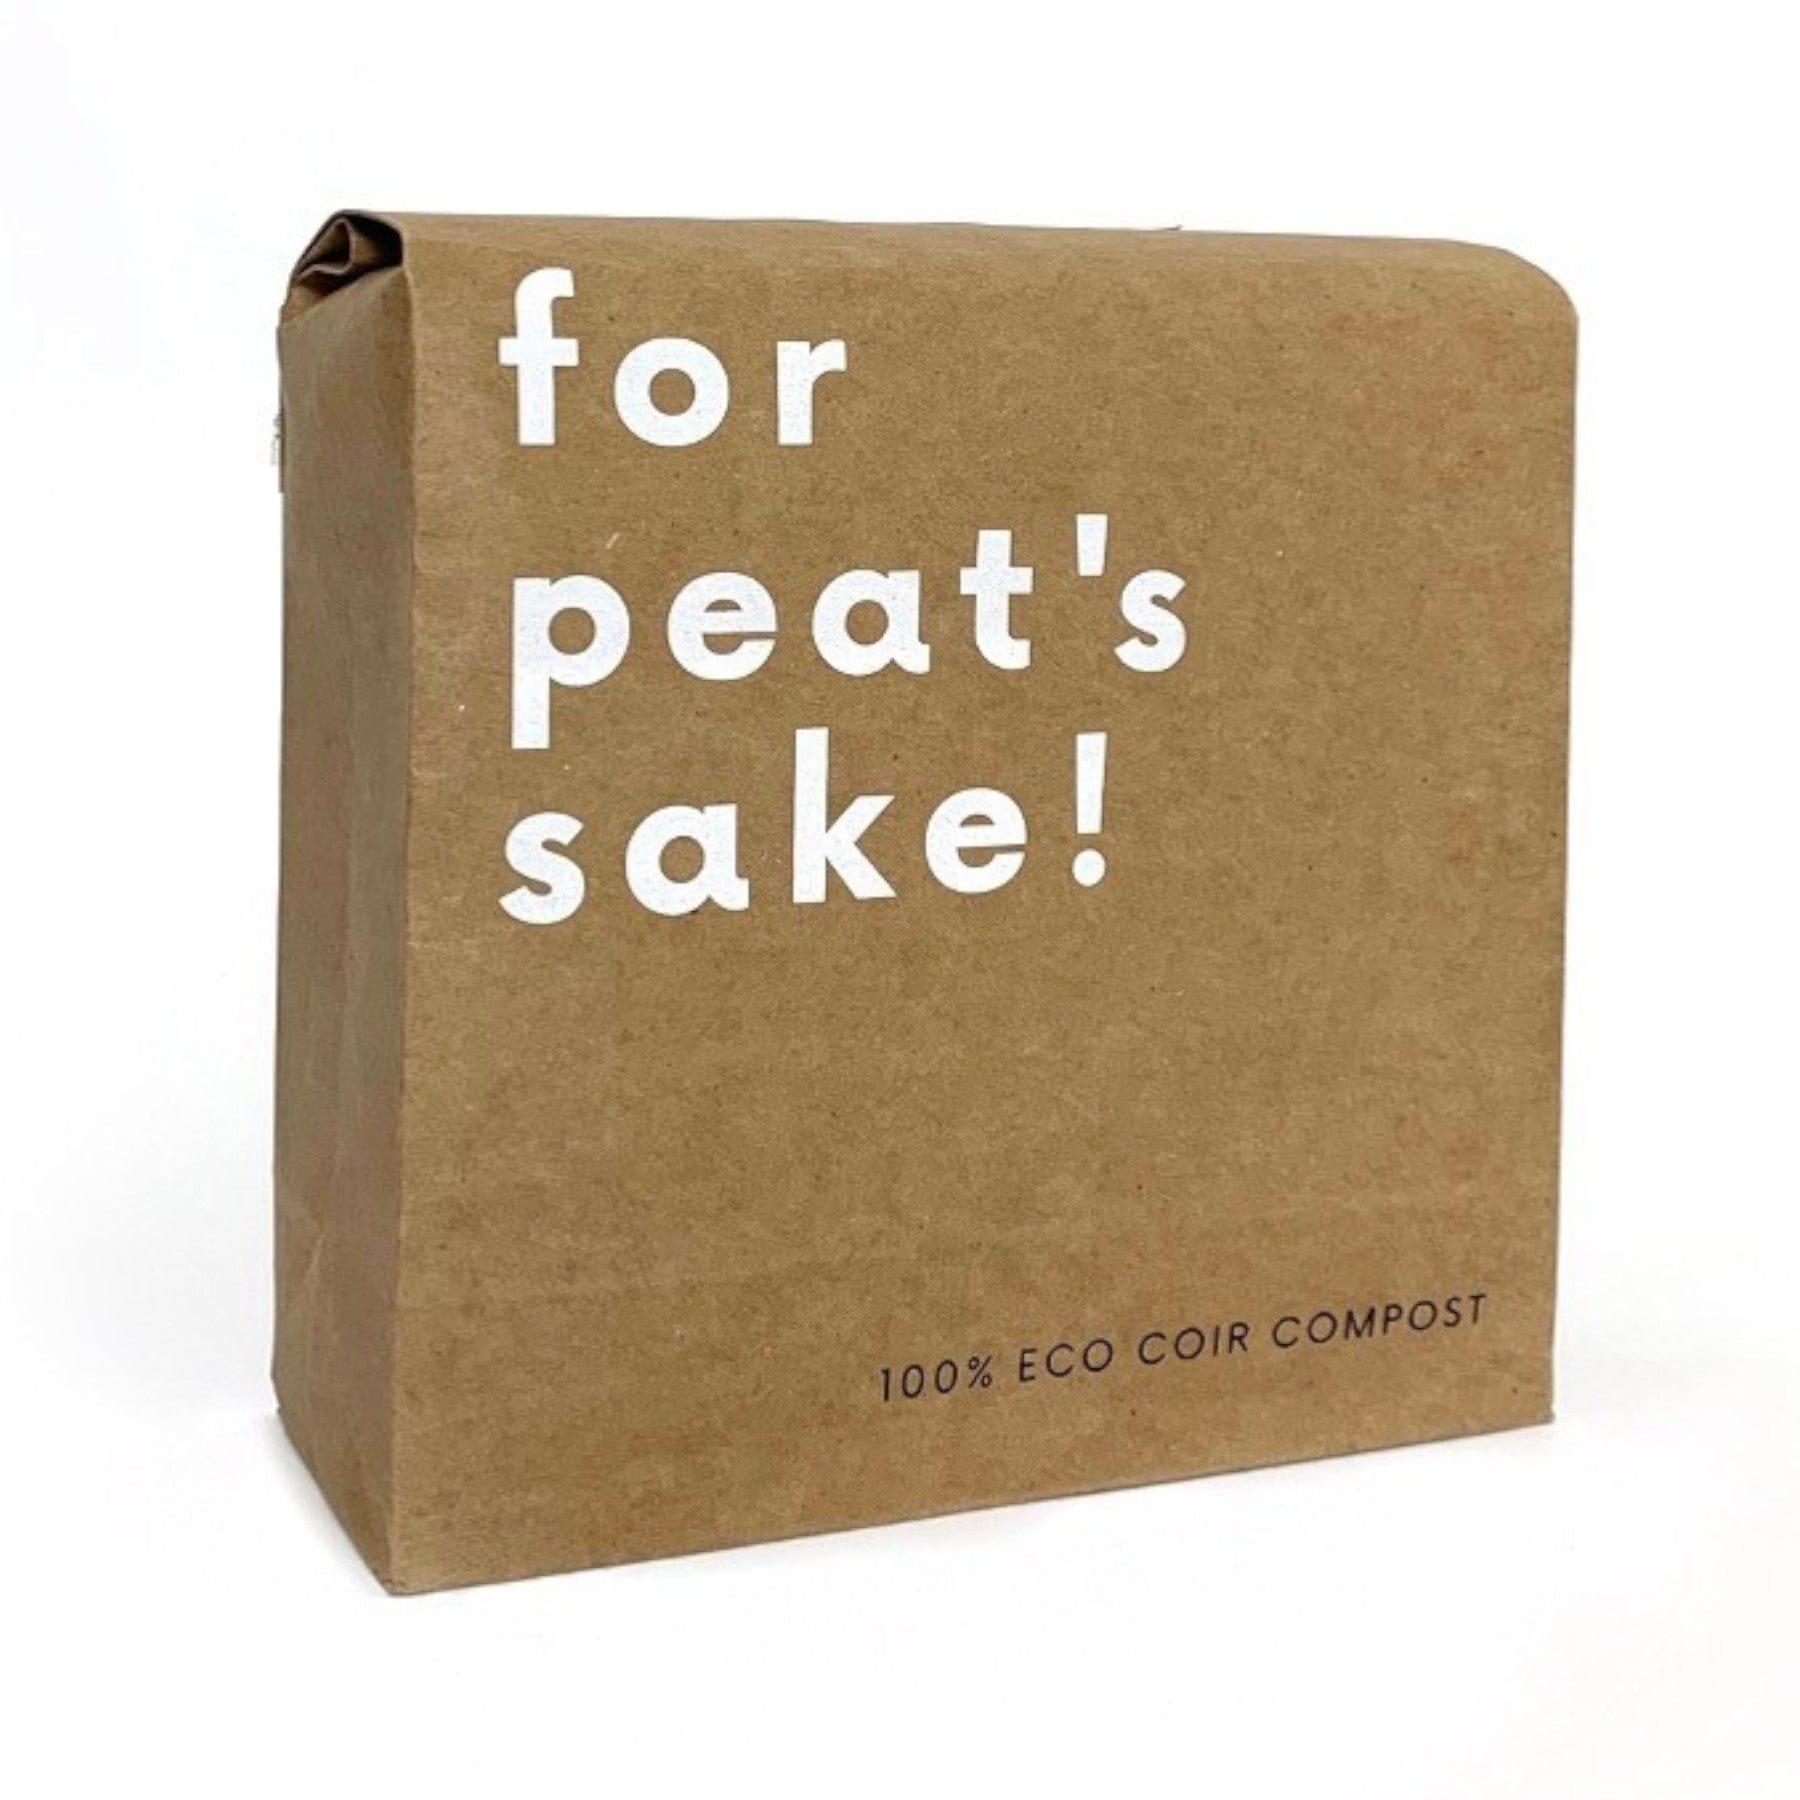 Eco-friendly compost packaging with "for peat's sake!" slogan, 100% eco coir compost, sustainable gardening product, brown paper bag, environmental conservation concept.